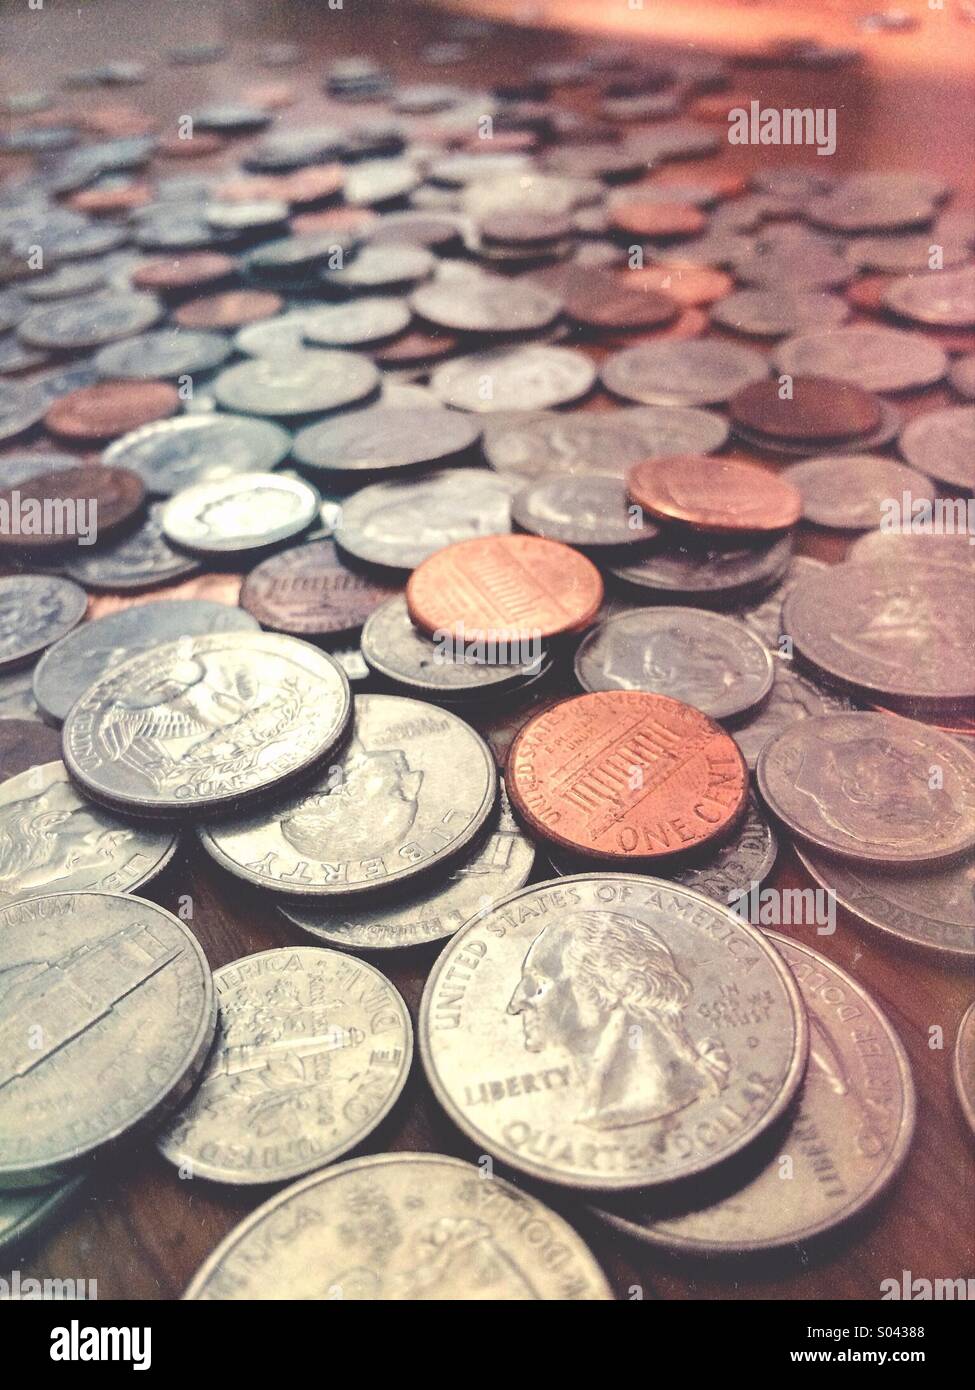 A large pile of coins - quarters, dimes, nickels, pennies Stock Photo